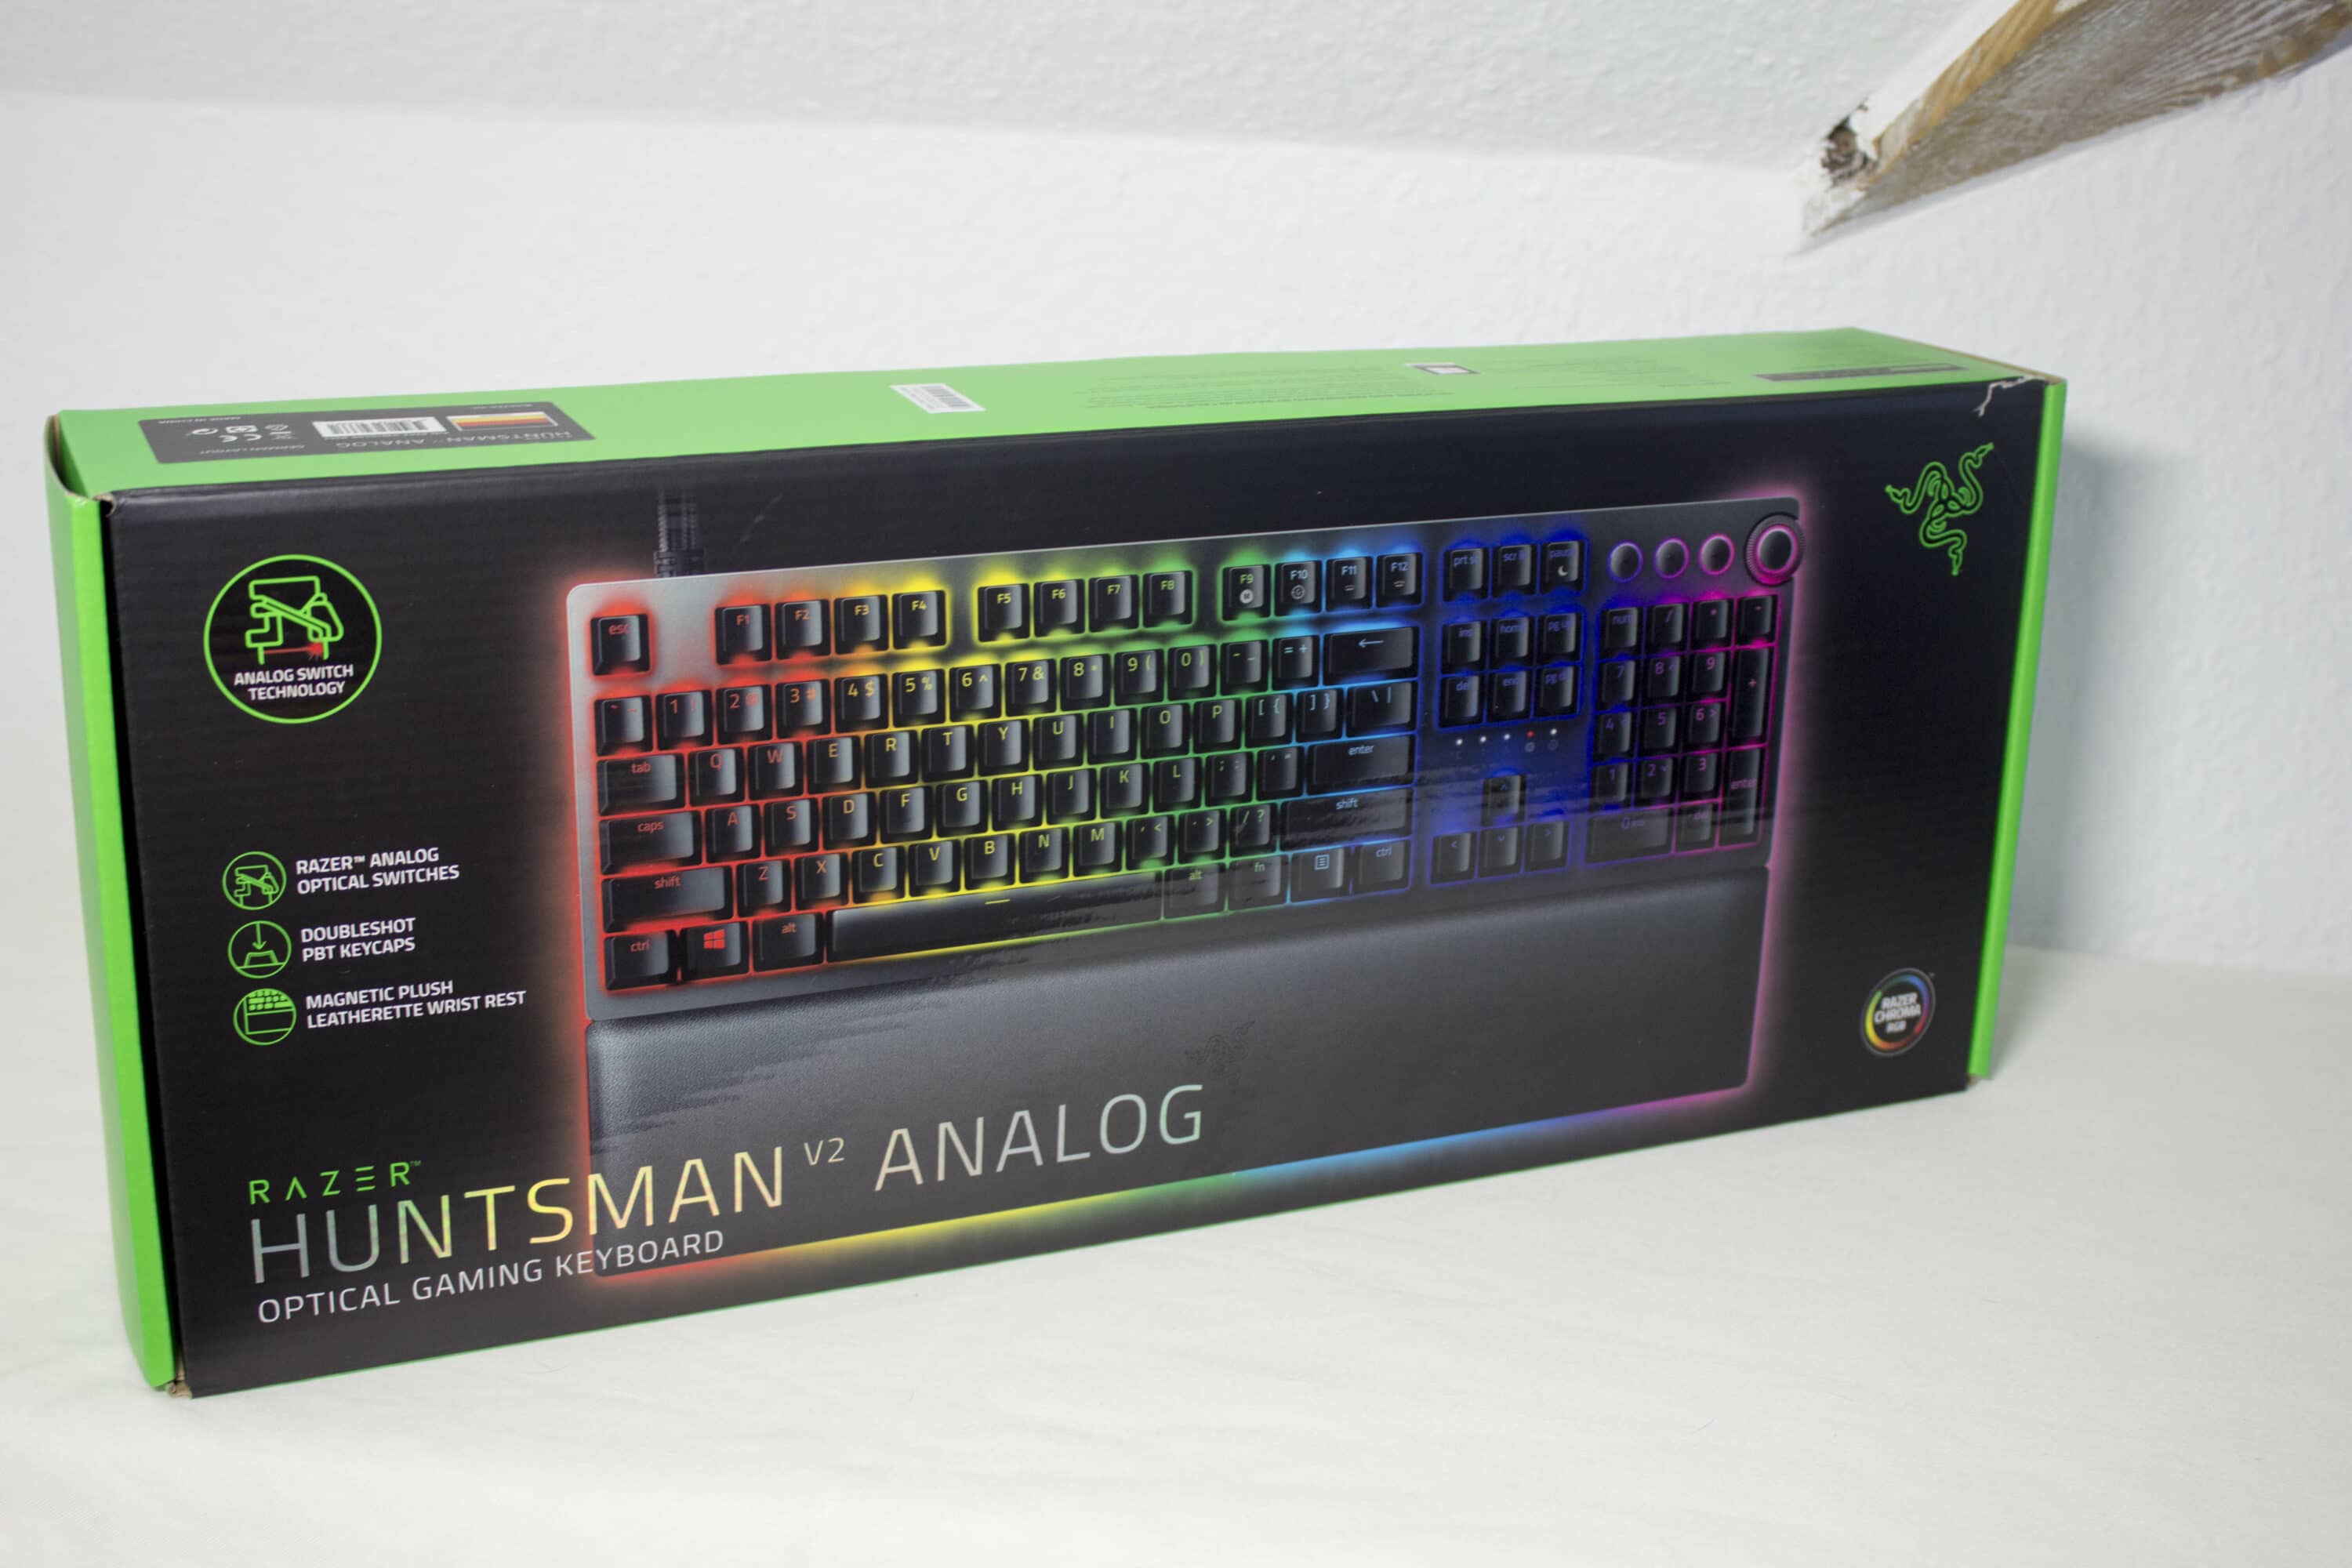 Razer Huntsman V2 Analog in review: What do controllers and keyboards